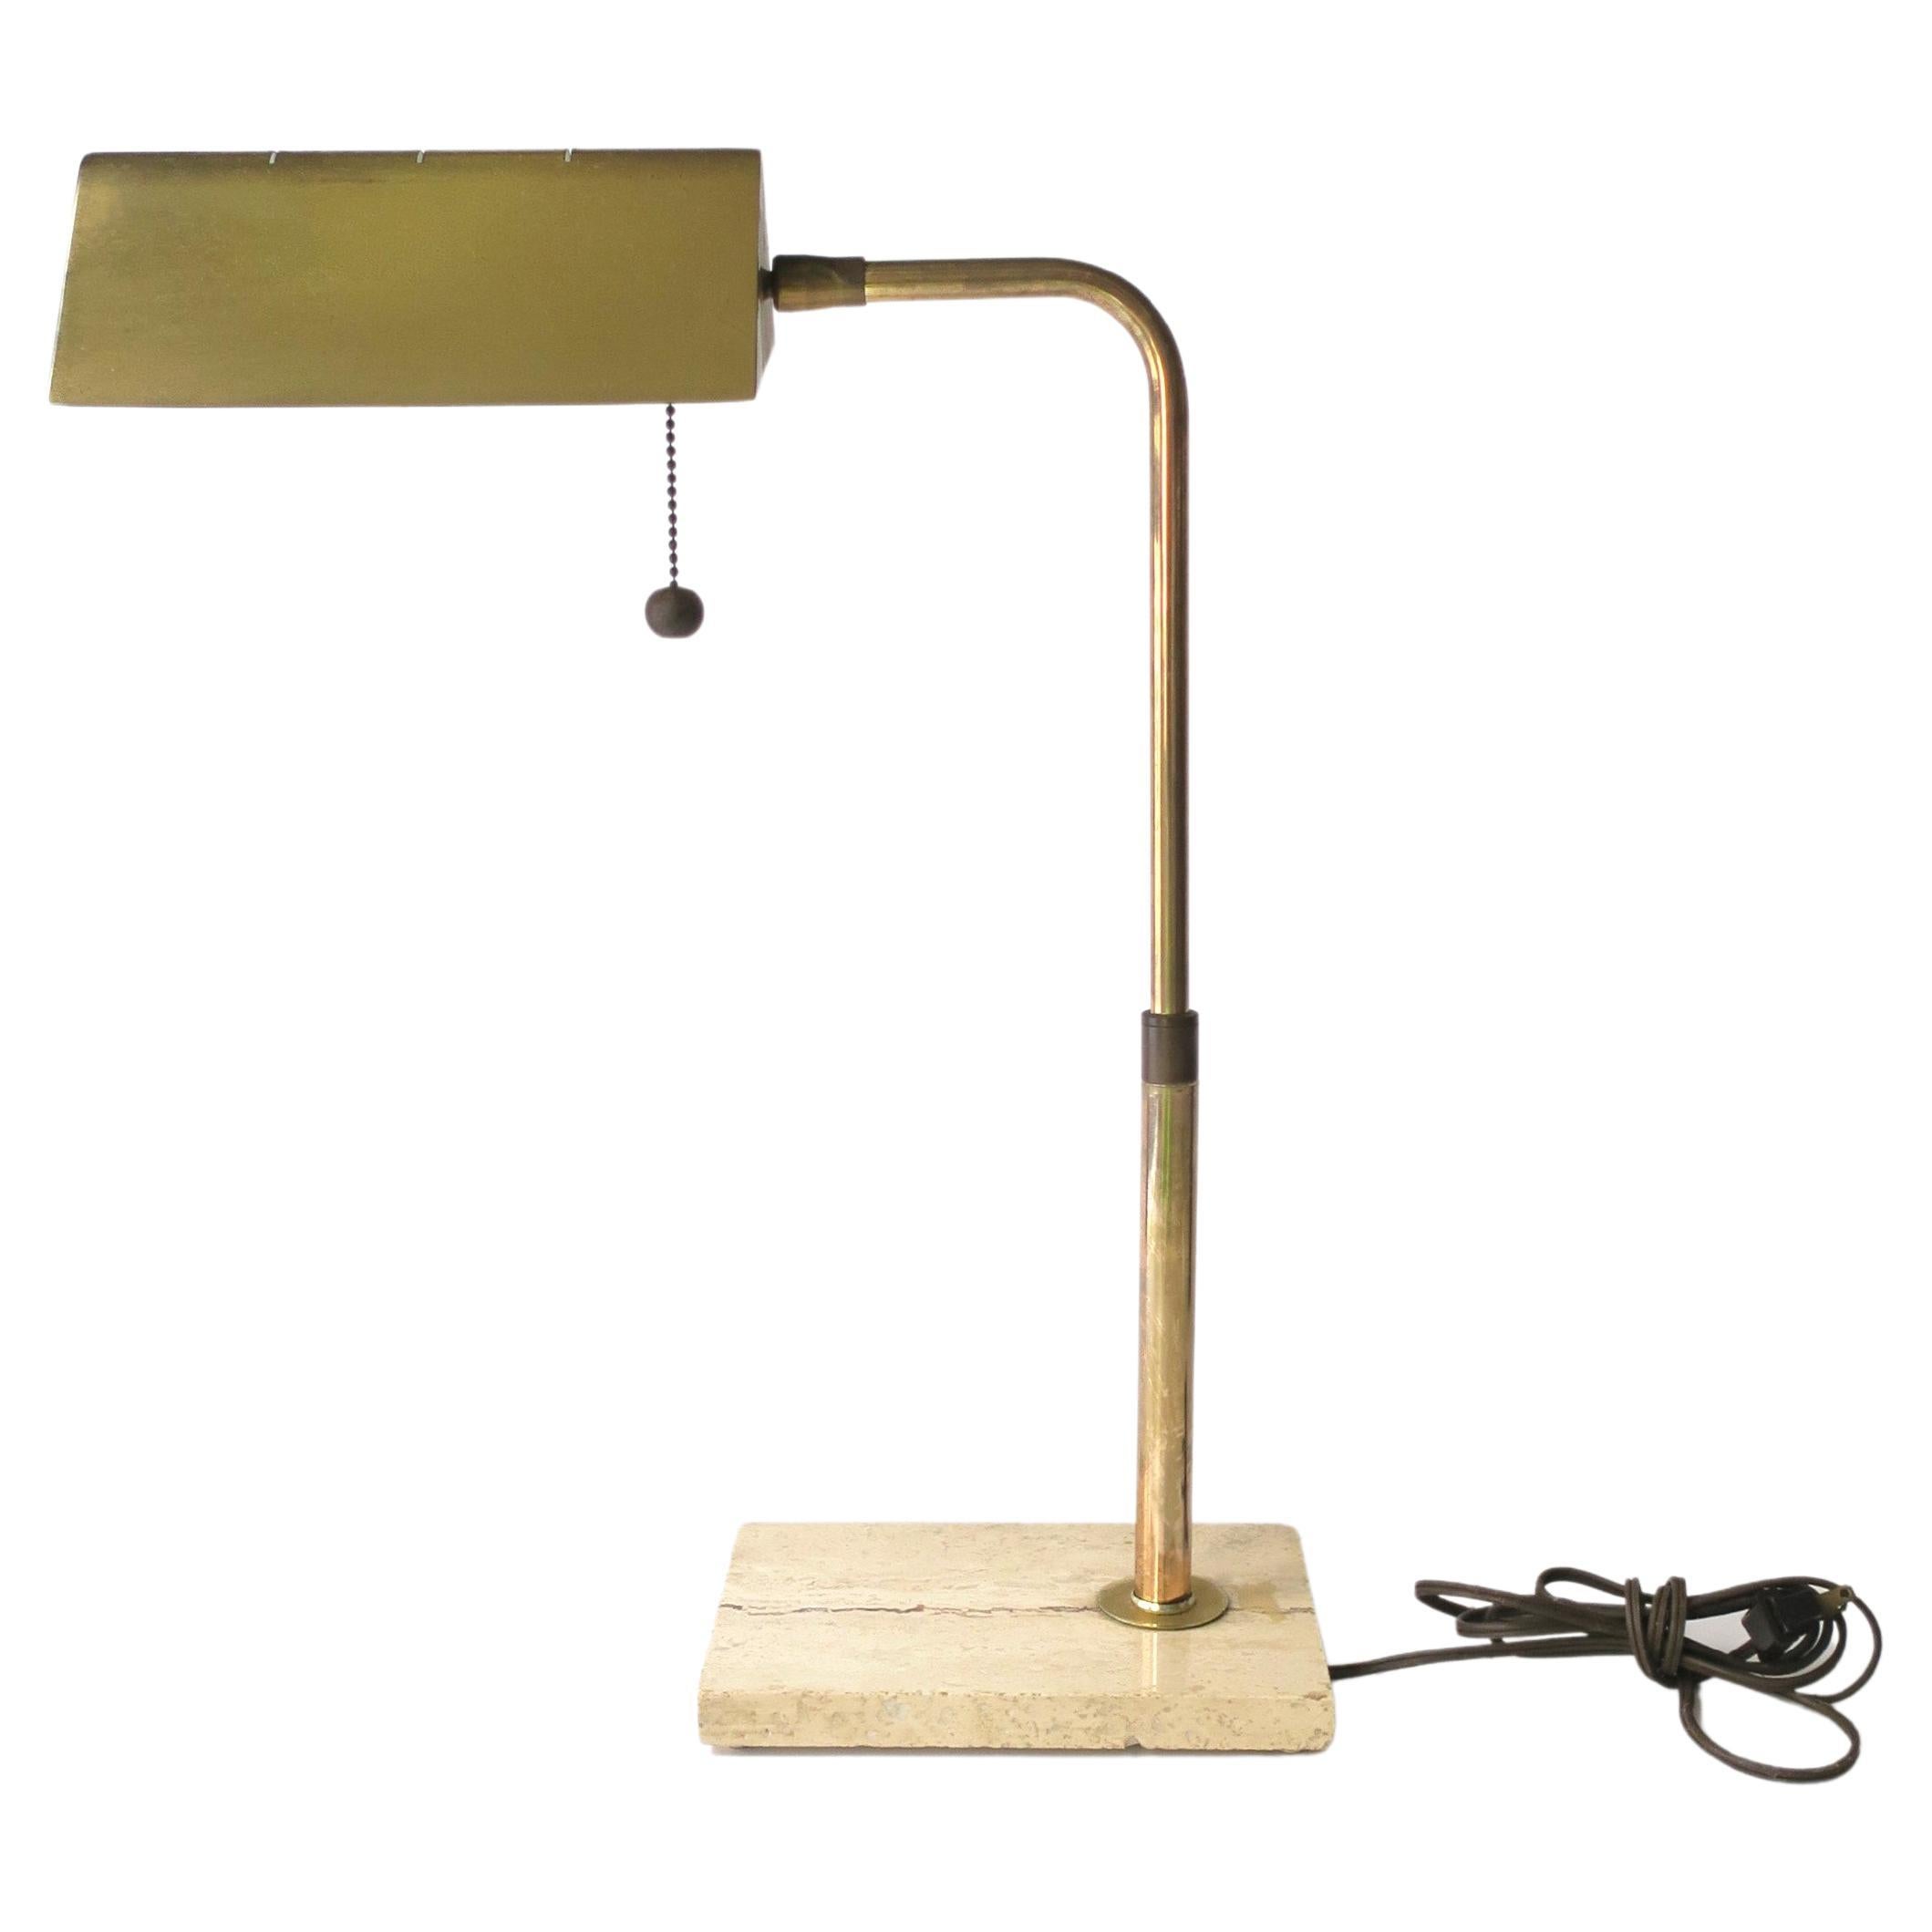 Modern Italian Brass and Travertine Marble Desk or Table Lamp, circa 1960s 1970s For Sale